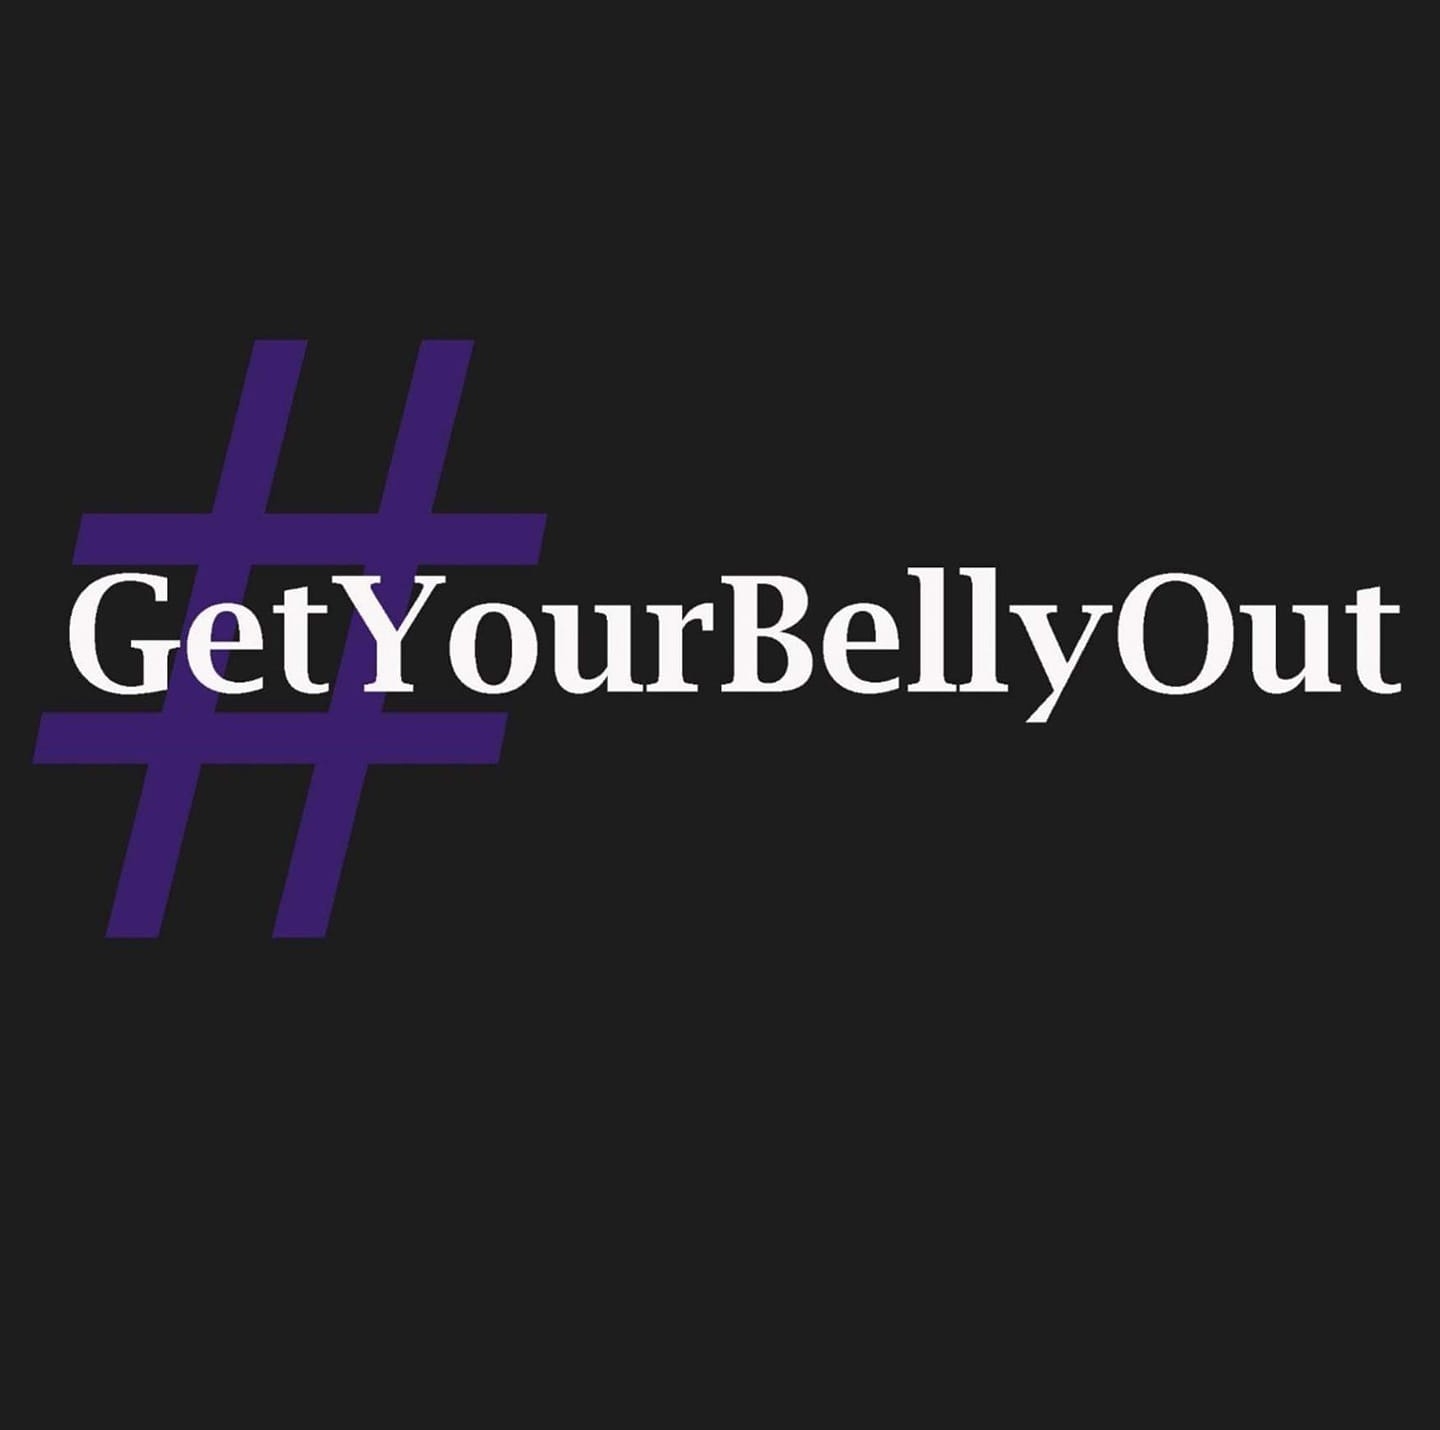 GetYourBellyOut